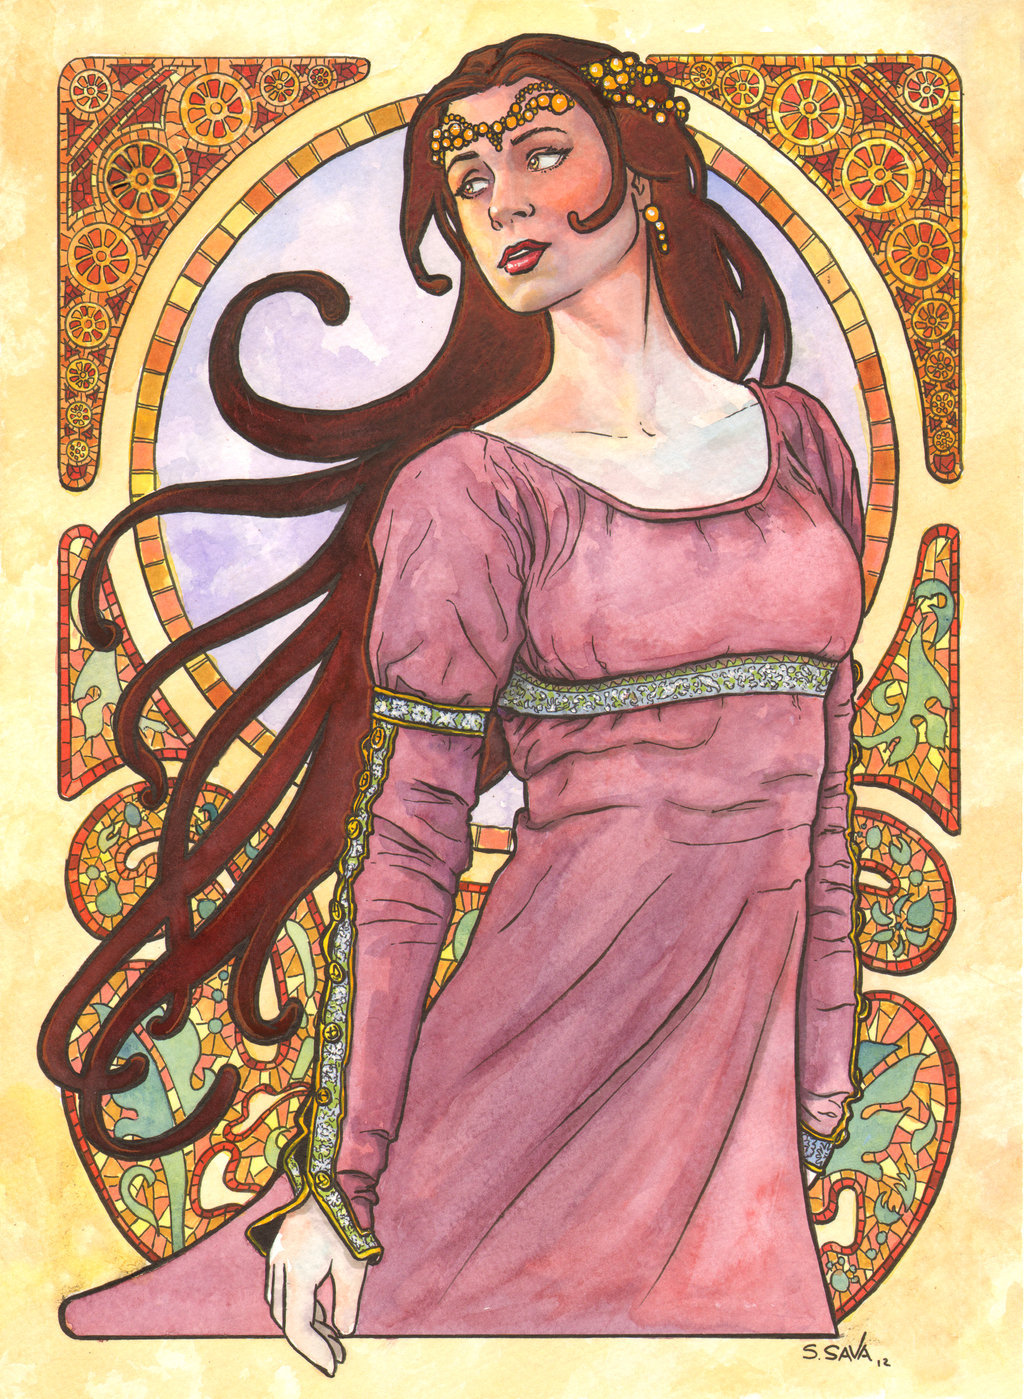 This is my Fourth painting in the Alphonse Mucha style. I’m really enjoying it. Thank you all for the compliments and the encouragement. I hope to continue to do this. Watercolor and ink on 11x15 inch watercolor paper The photo reference/inspiration...